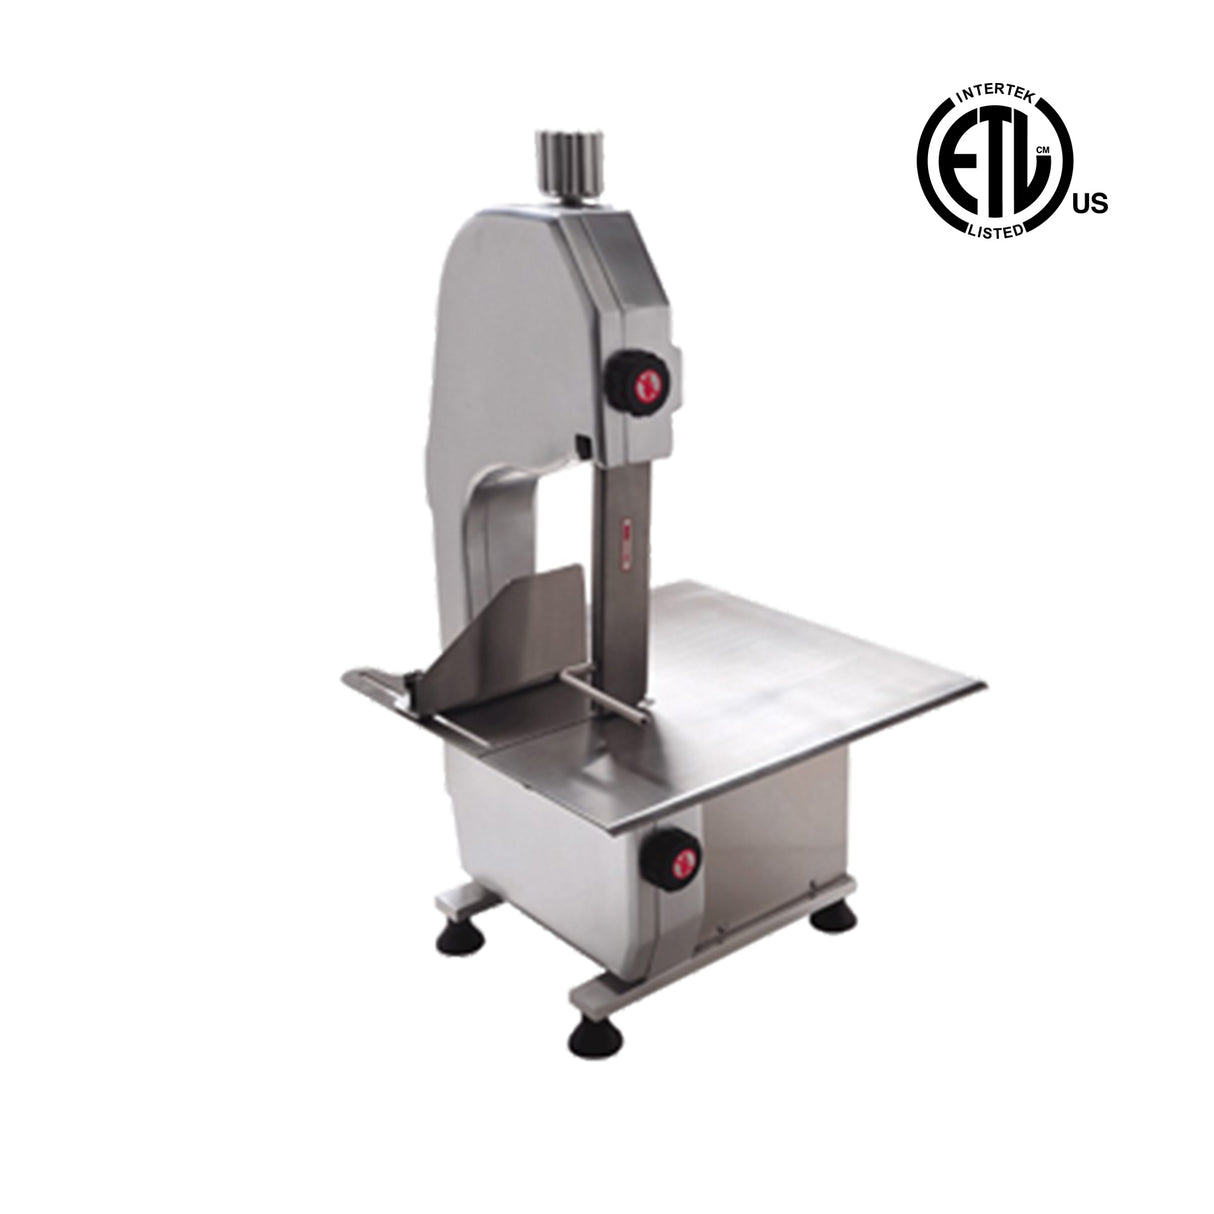 UHLA-165 | Tabletop Meat Saw